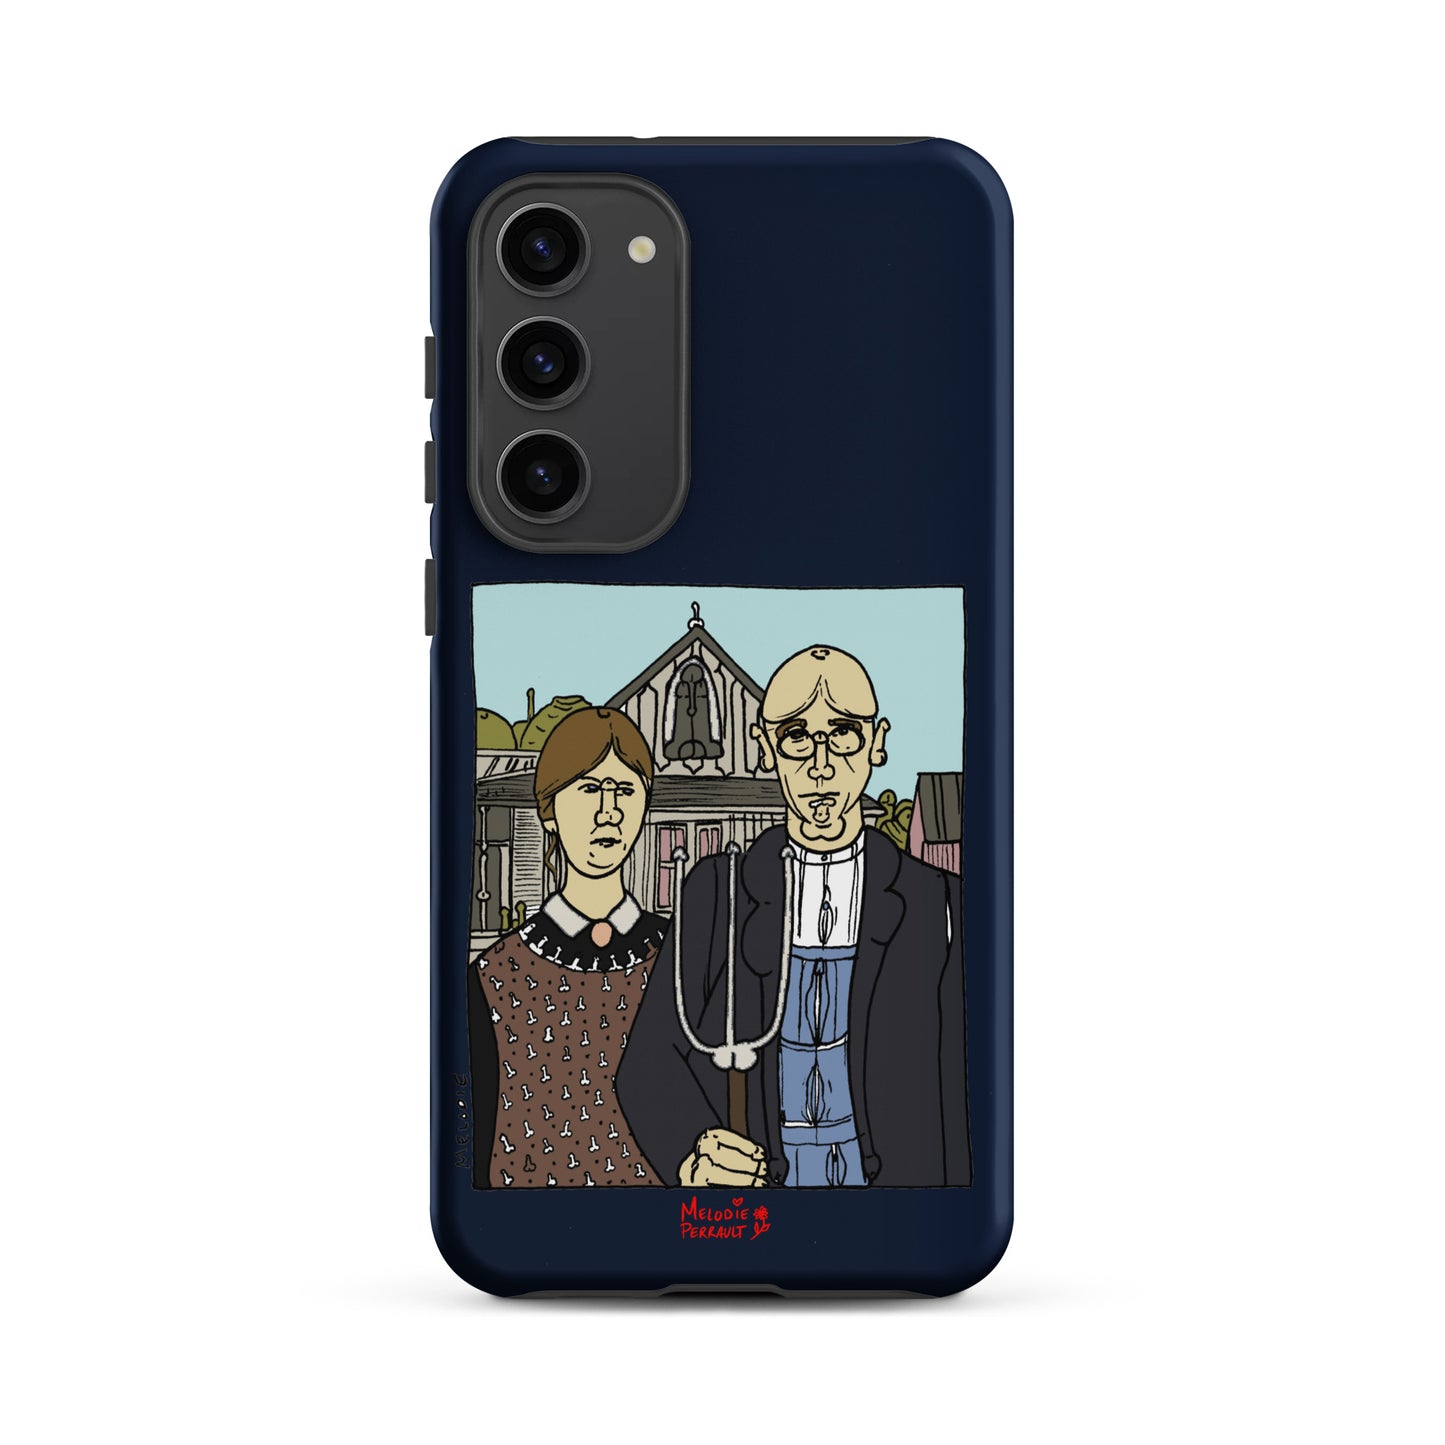 " Grand Wood " American Gothic, Tough case for Samsung®